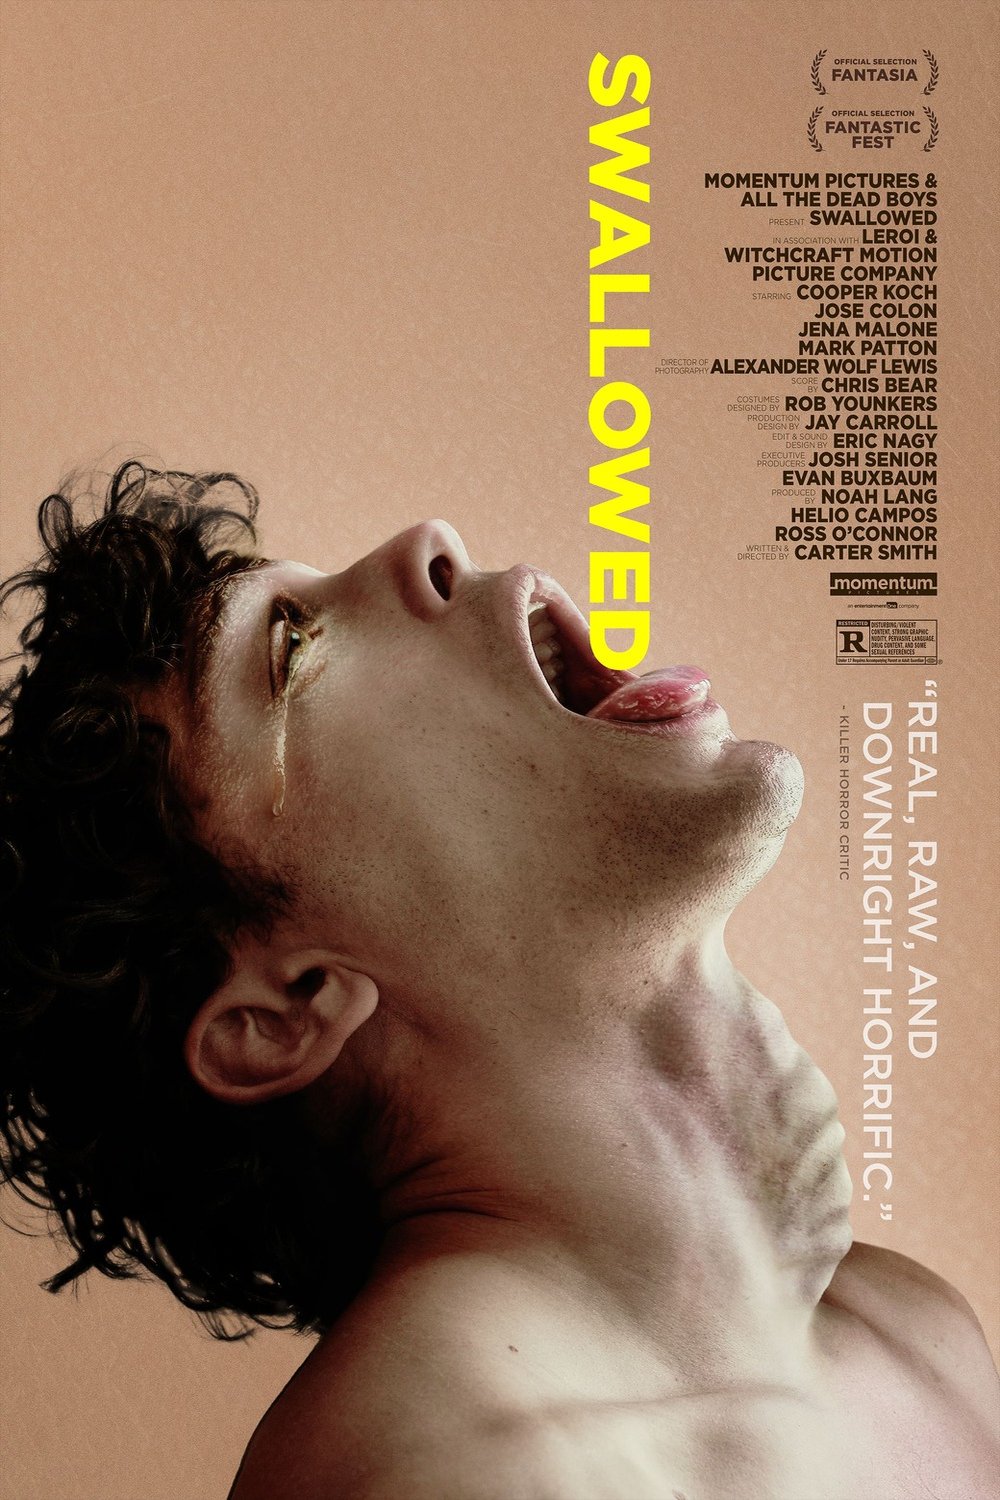 Poster of the movie Swallowed